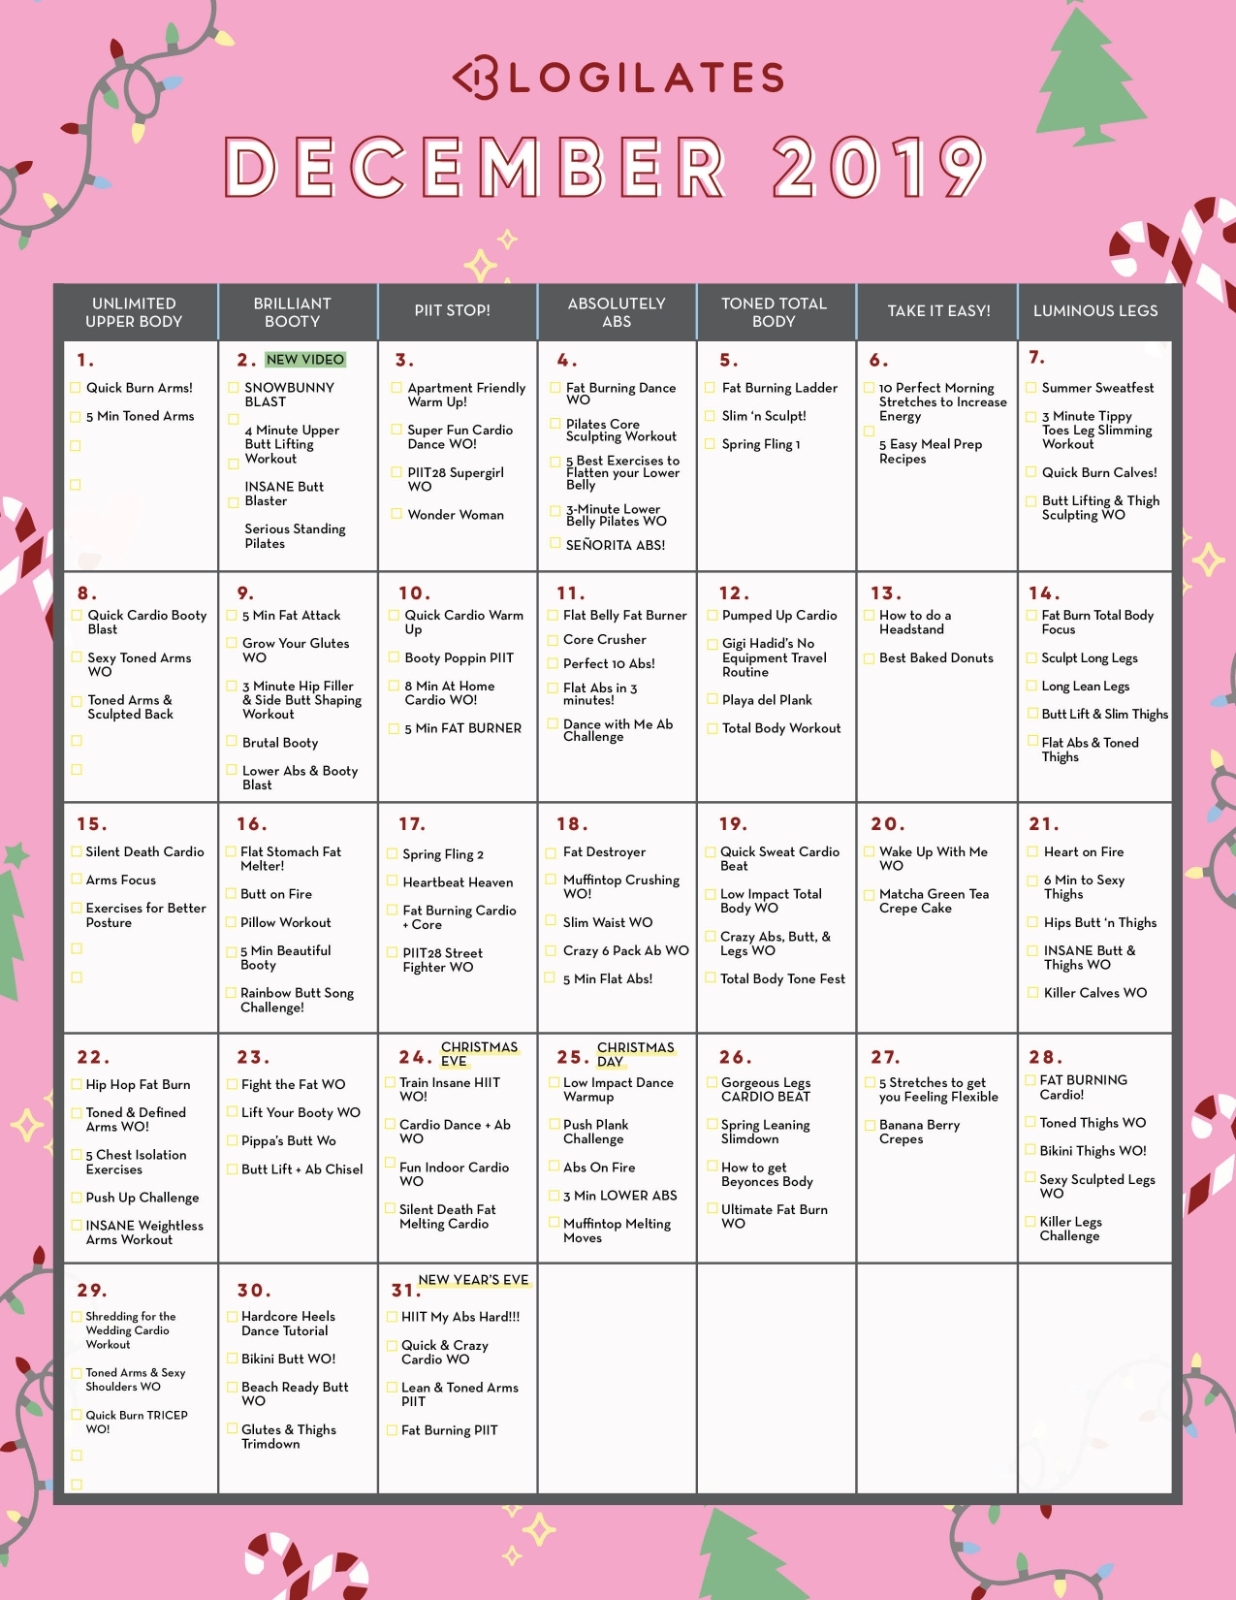 Your Workout Calendar | Personalised Calendar From Blogilates